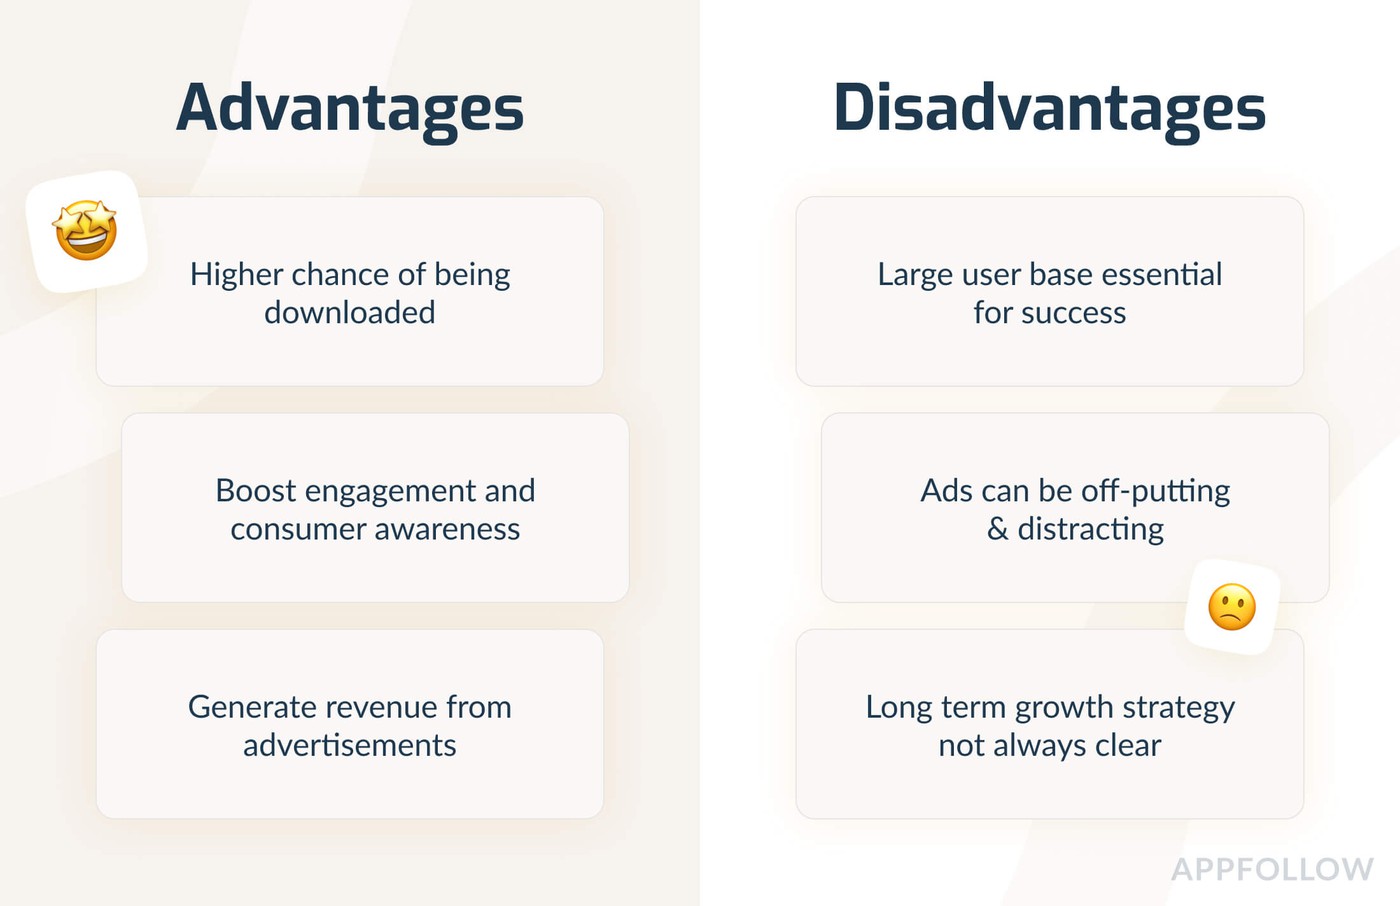 Advantages and disadvantages of choosing a free app strategy